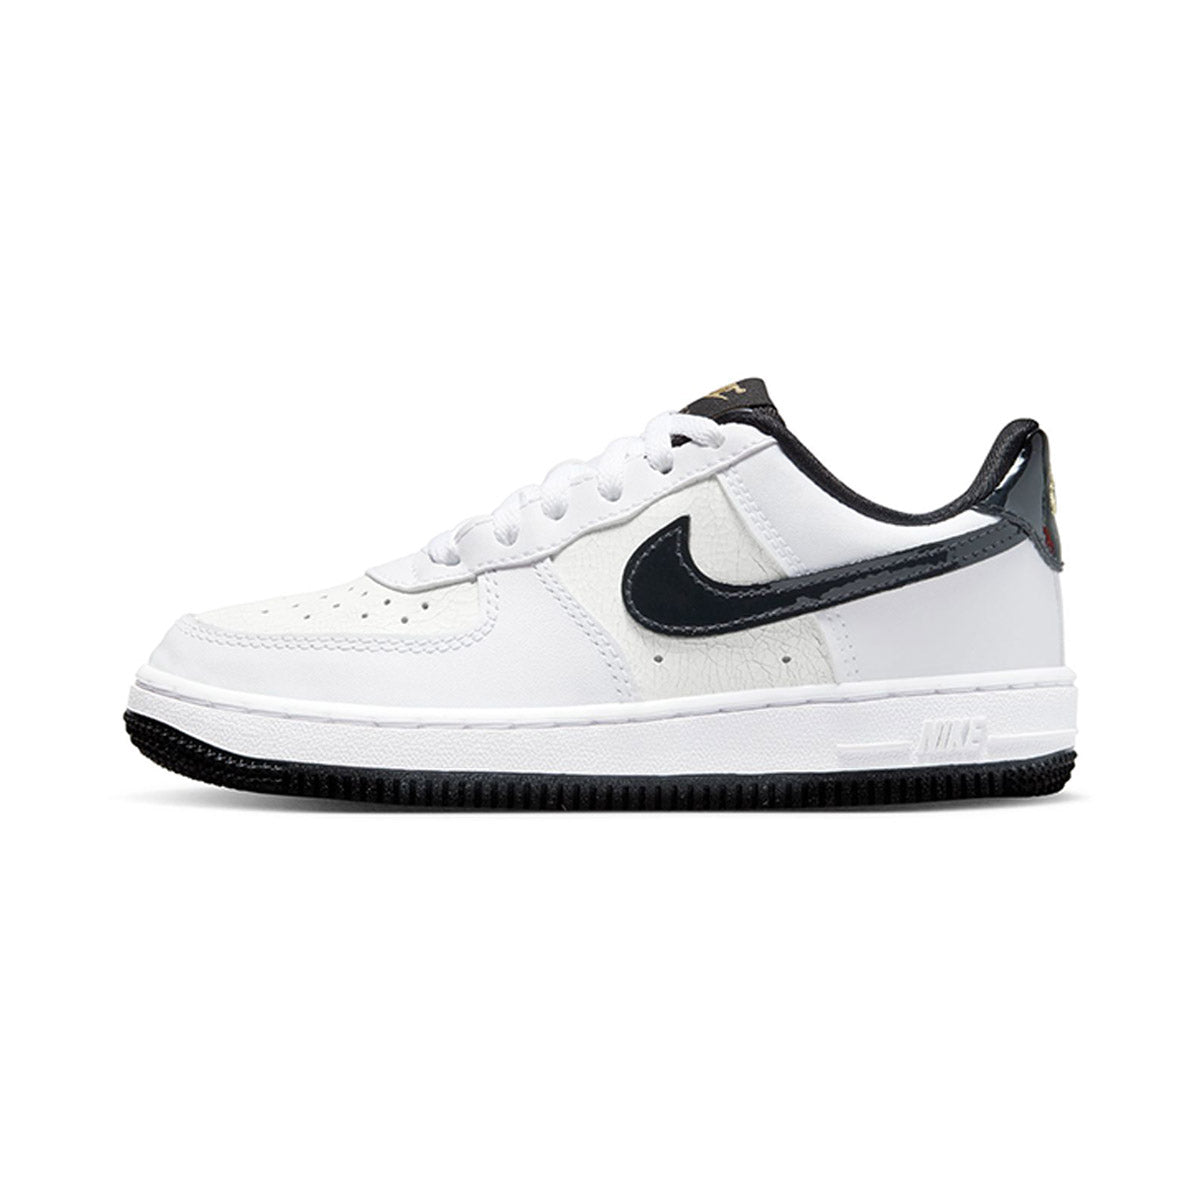 Big Kids' Nike Air Force 1 LV8 2 Casual Shoes